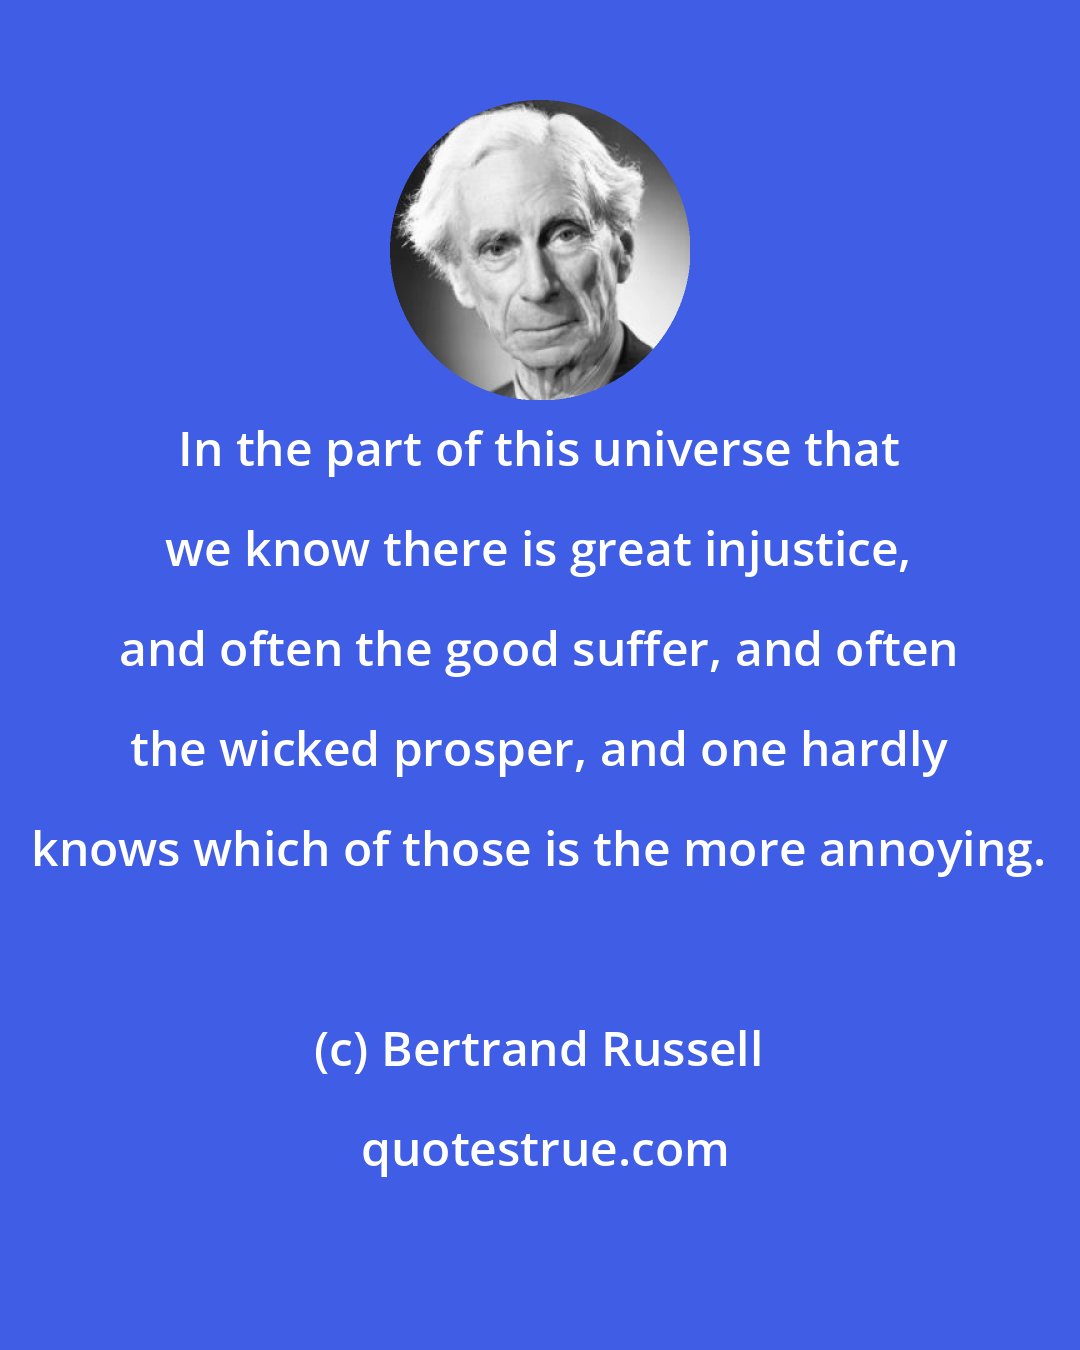 Bertrand Russell: In the part of this universe that we know there is great injustice, and often the good suffer, and often the wicked prosper, and one hardly knows which of those is the more annoying.